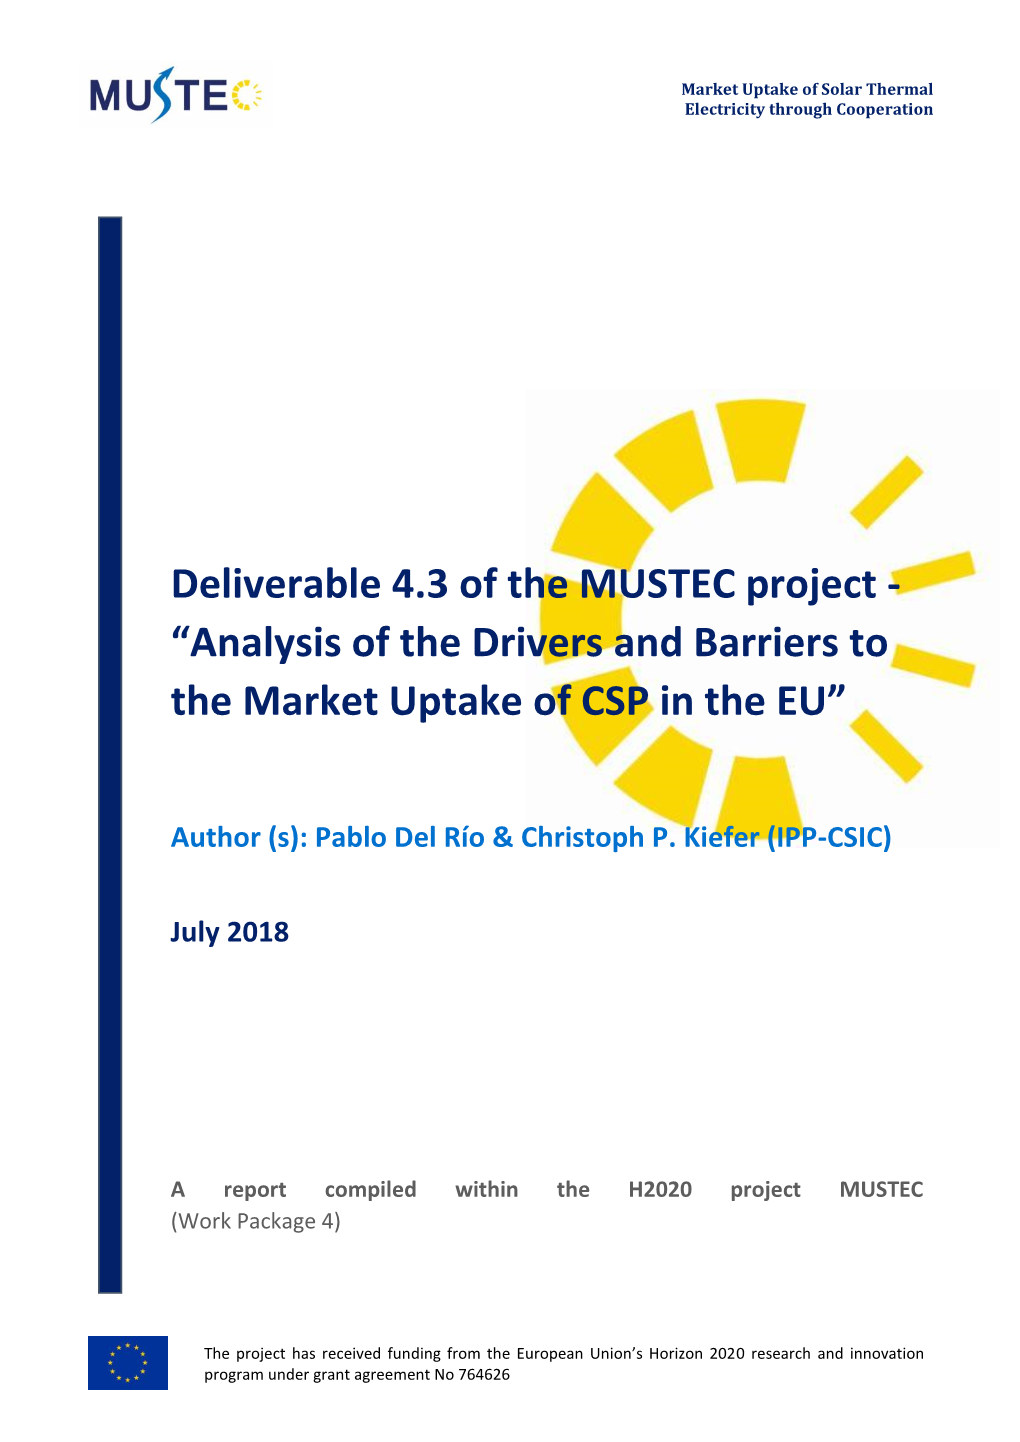 Deliverable 4.3 of the MUSTEC Project - “Analysis of the Drivers and Barriers to the Market Uptake of CSP in the EU”